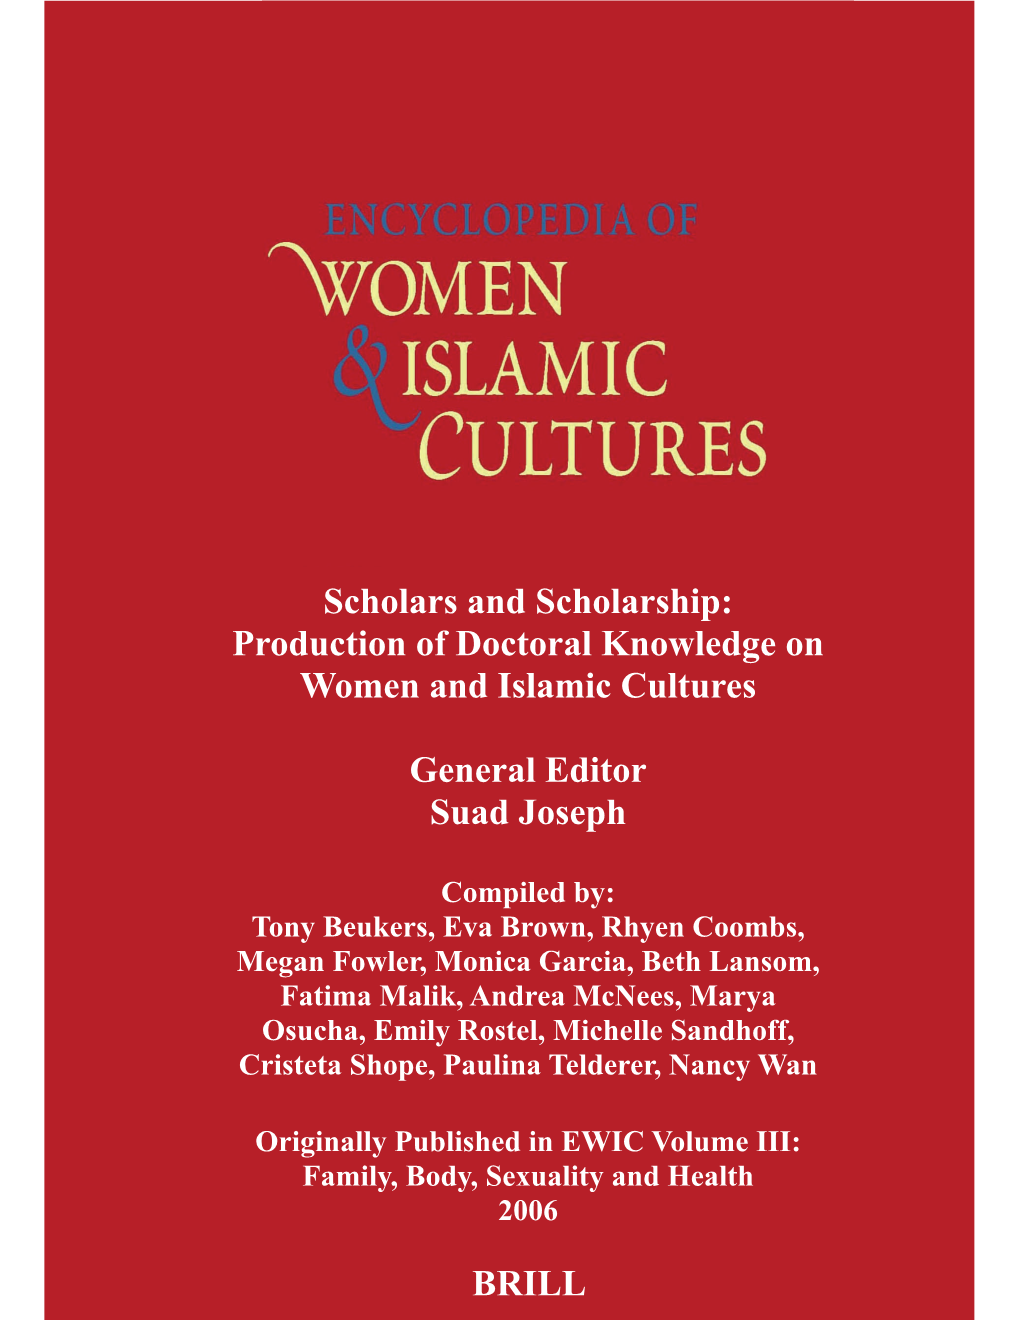 Scholars and Scholarship: Production of Doctoral Knowledge on Women and Islamic Cultures